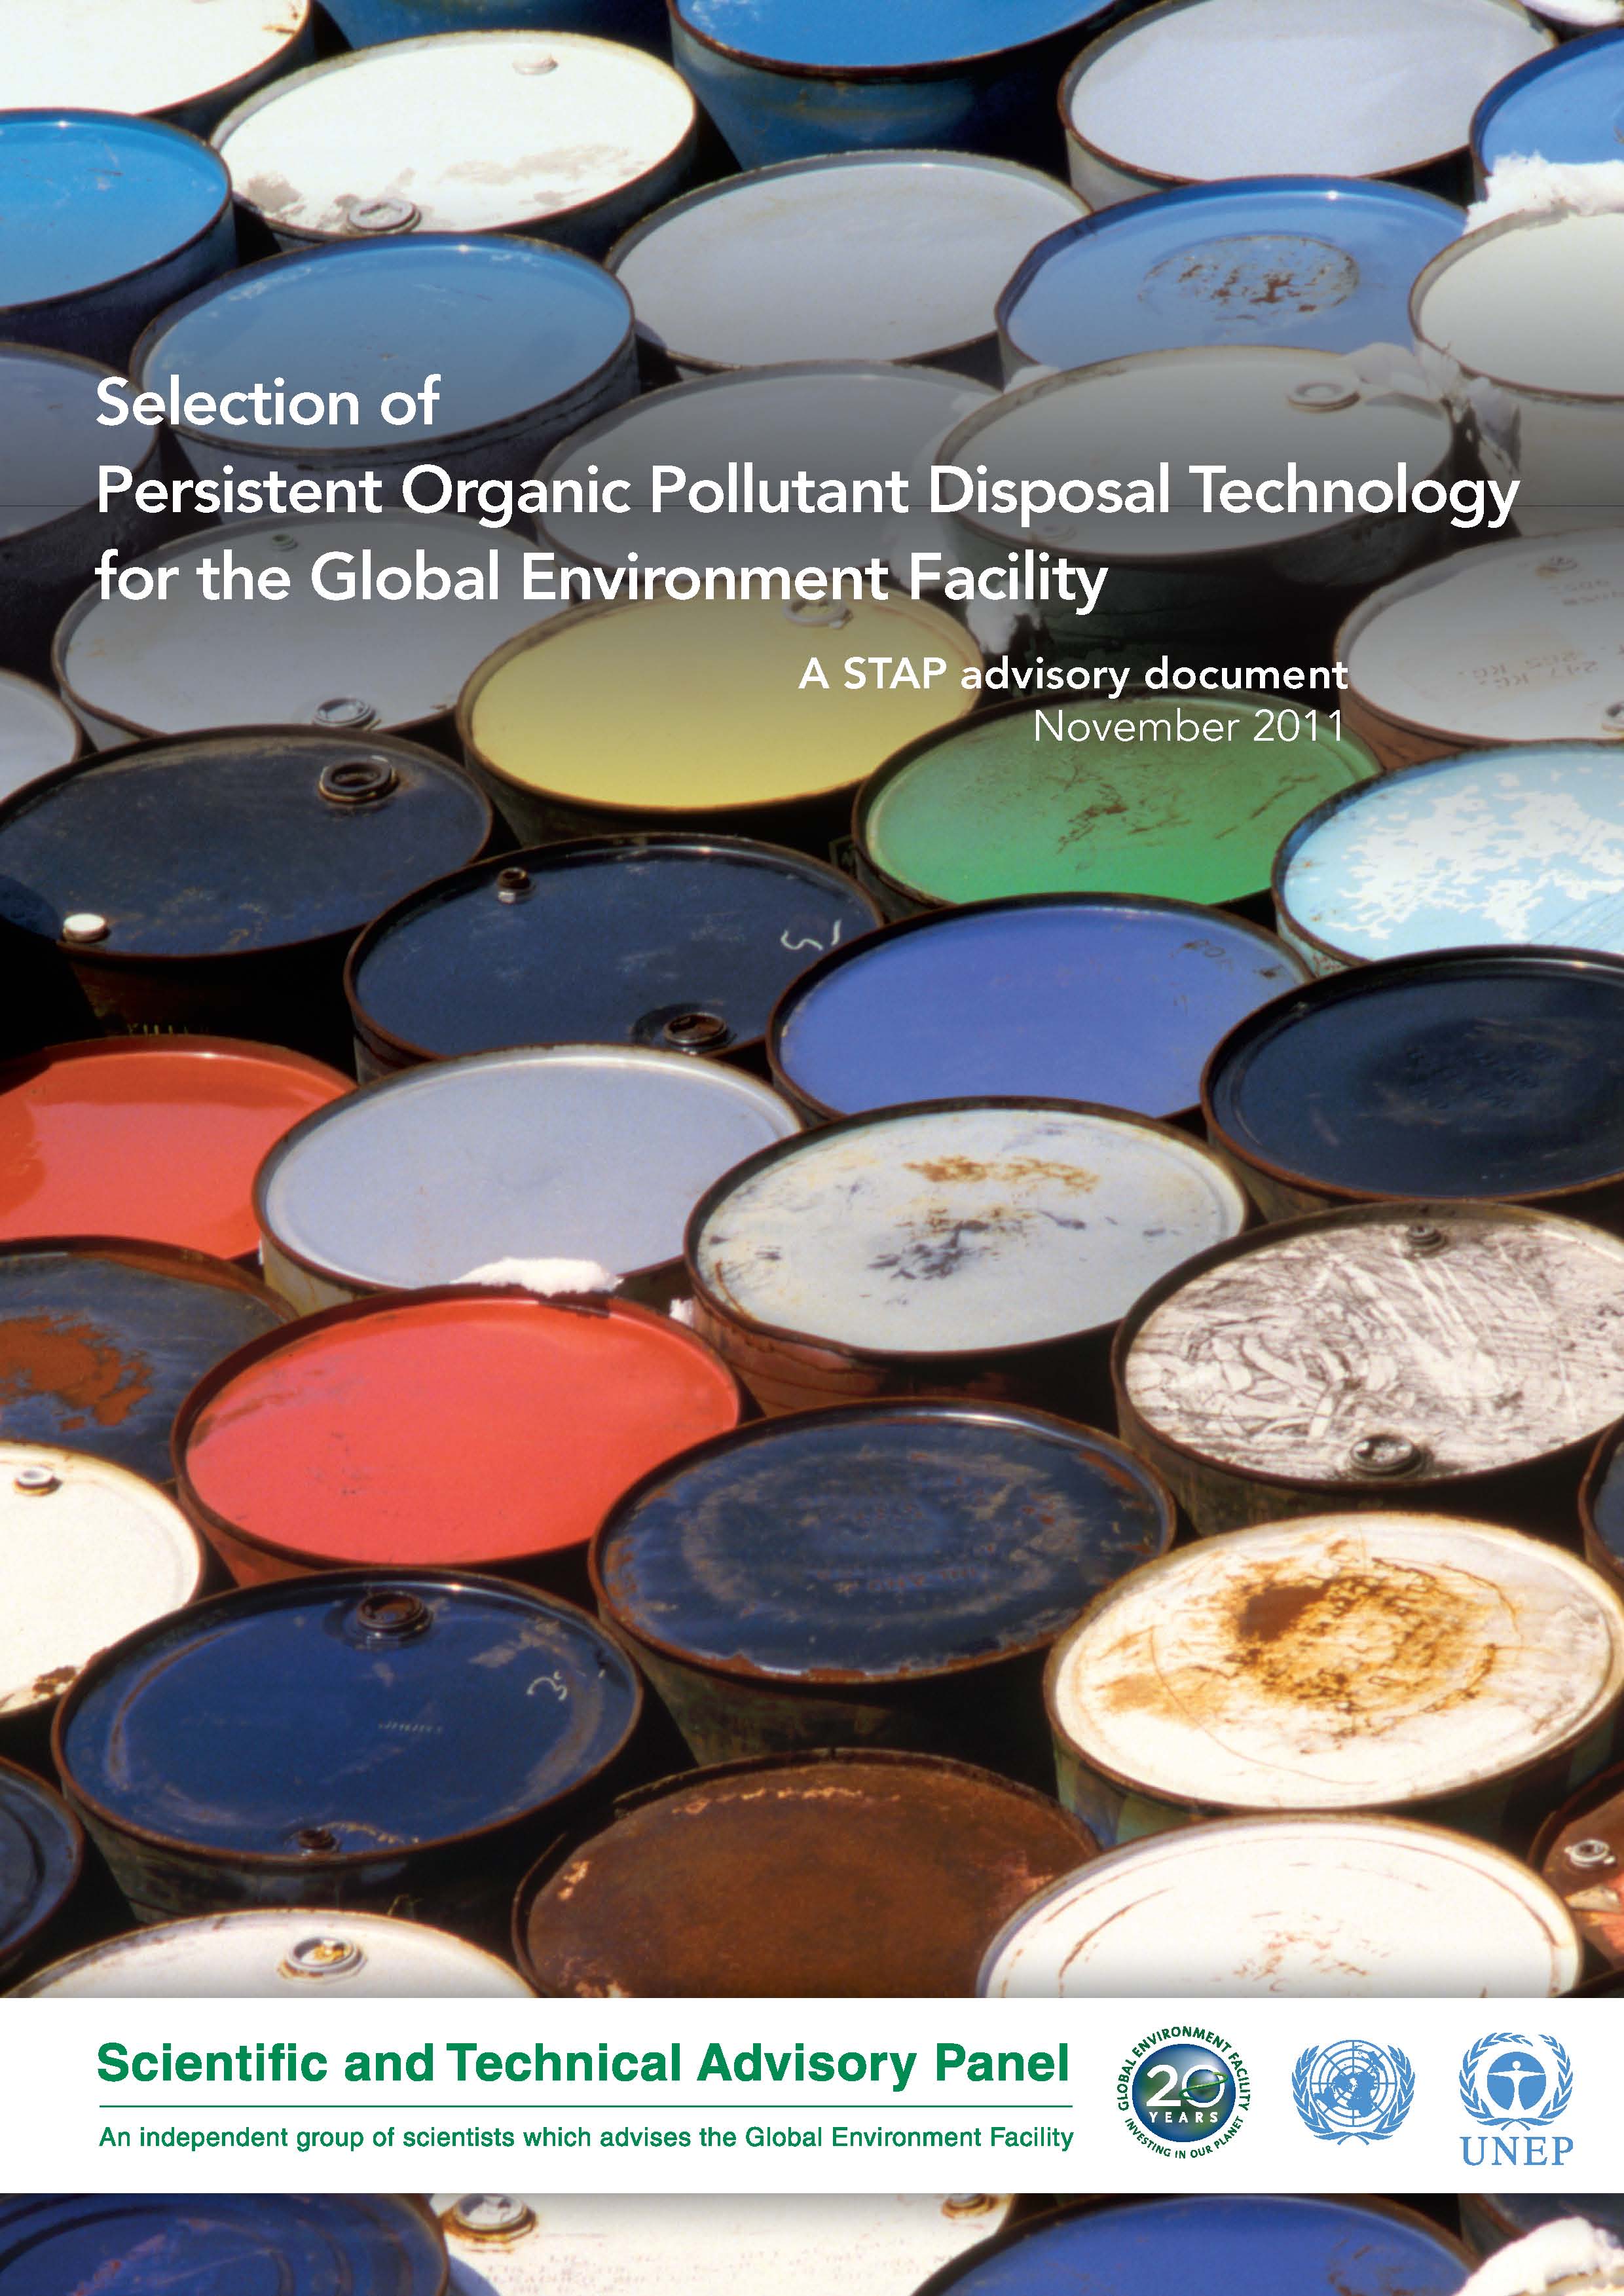 Selection of Persistent Organic Pollutant Disposal Technology for the GEF